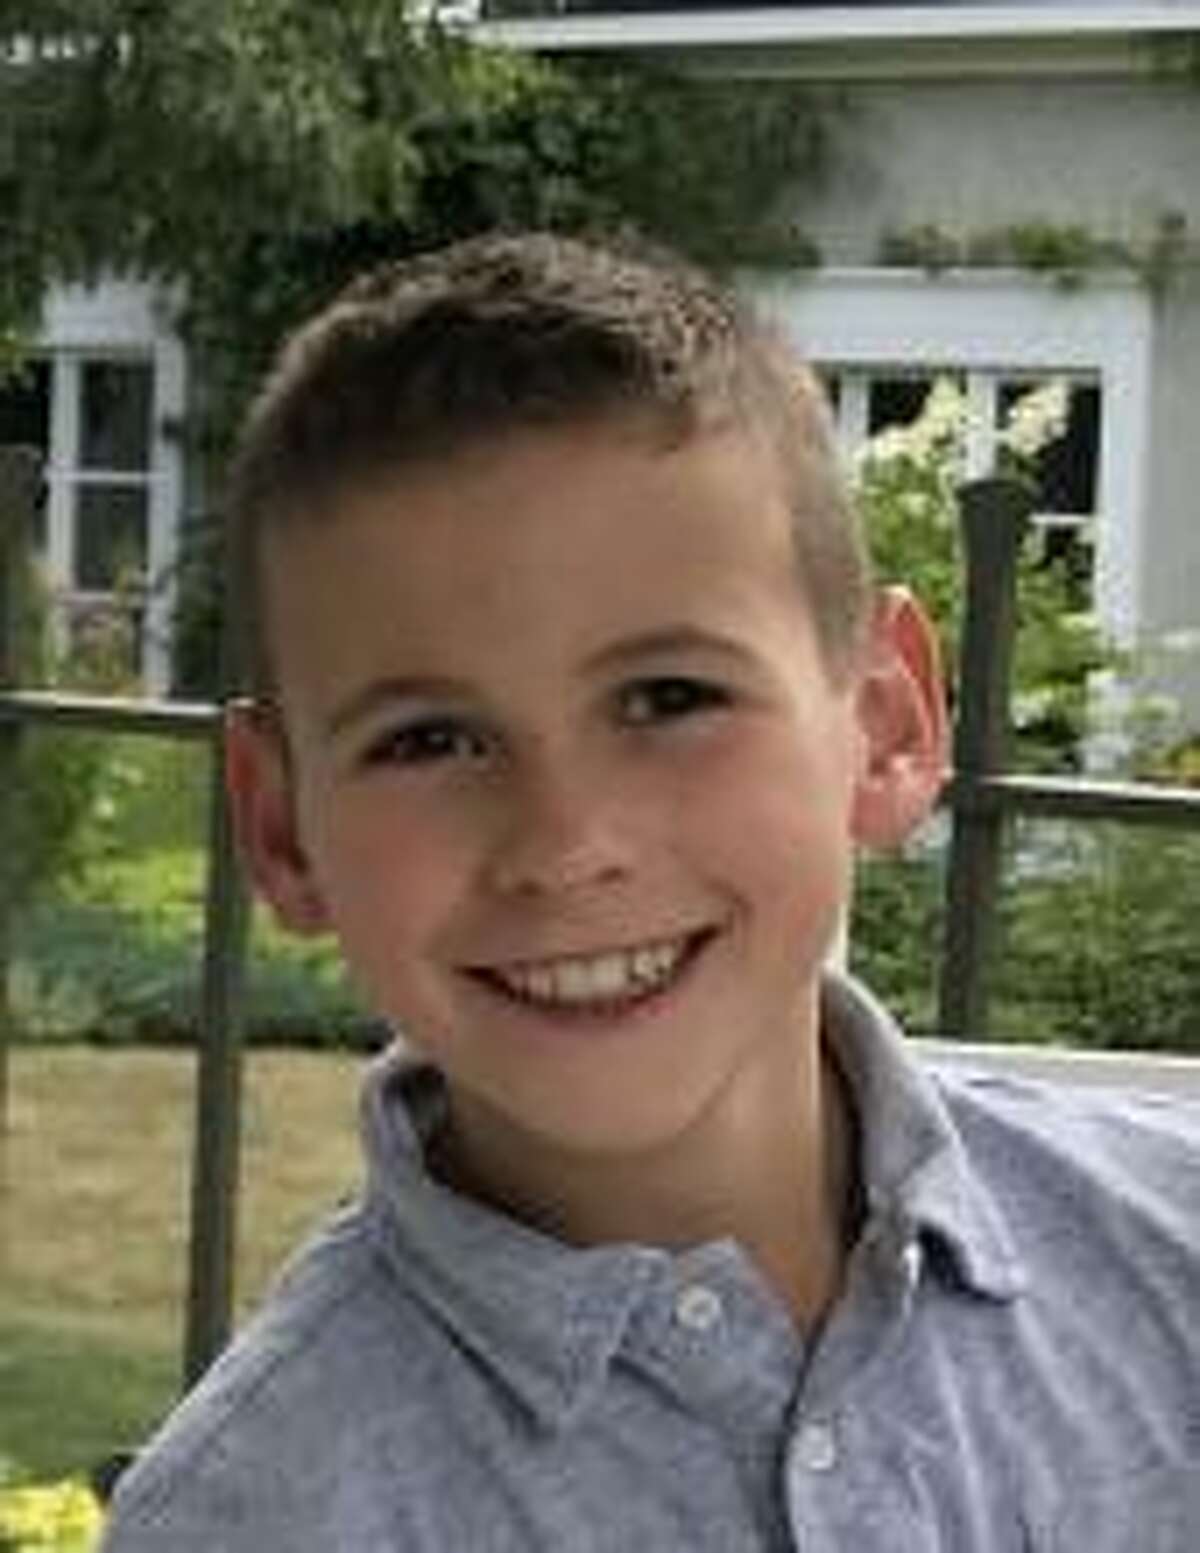 Tristan Barhorst, 10, was killed last June after being hit by a Jeep Wrangler on Wiese Road in Wallingford, as he crossed the street after making a purchase from an ice cream truck.